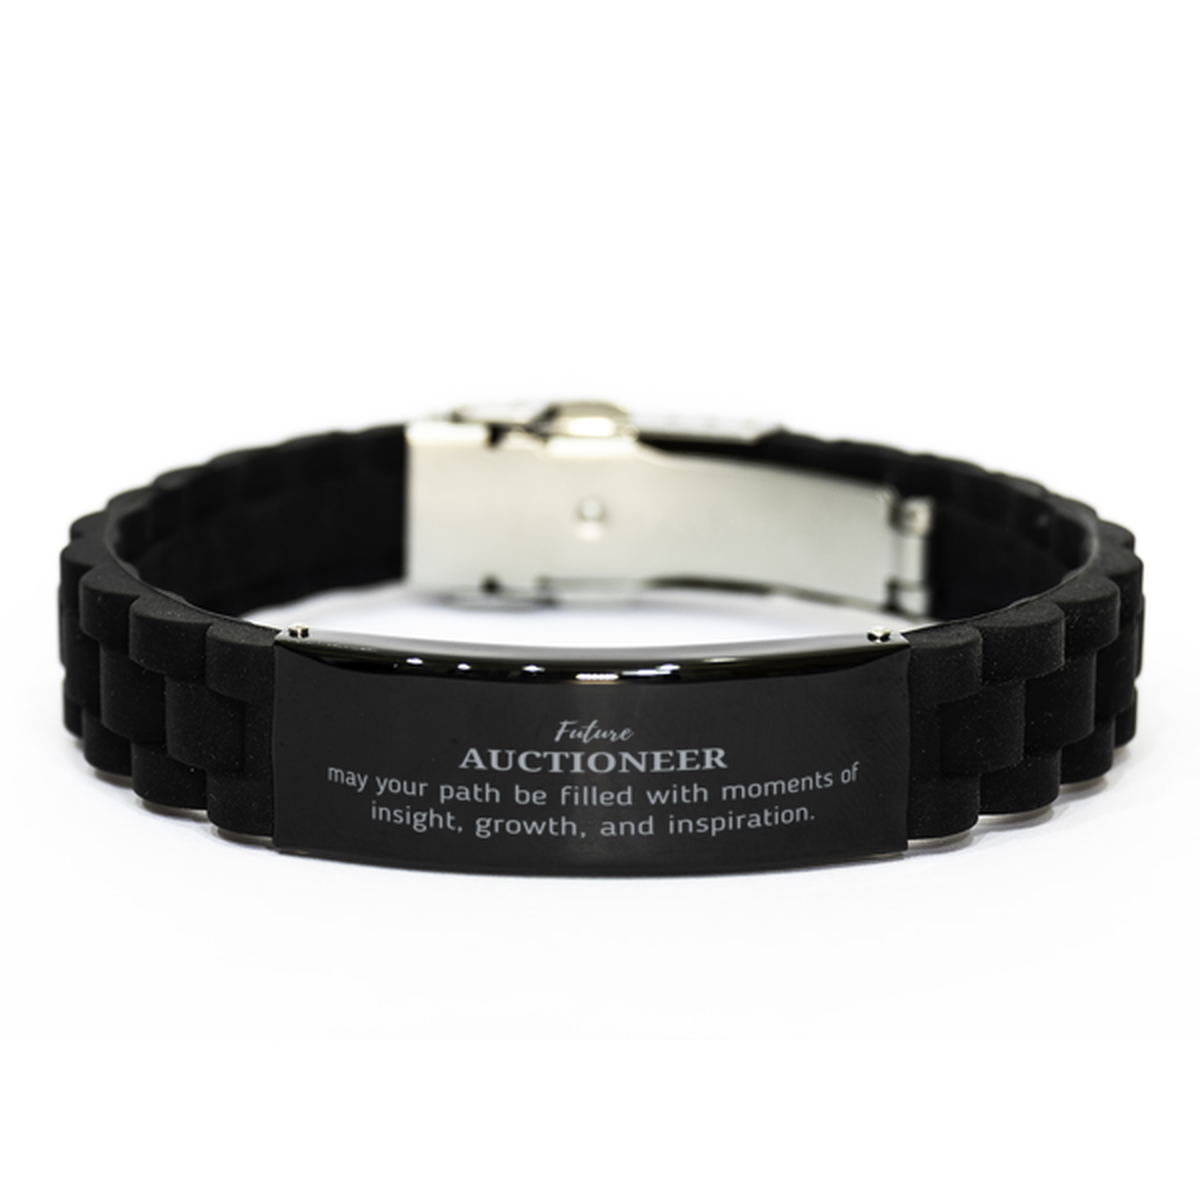 Future Auctioneer Gifts, May your path be filled with moments of insight, Graduation Gifts for New Auctioneer, Christmas Unique Black Glidelock Clasp Bracelet For Men, Women, Friends